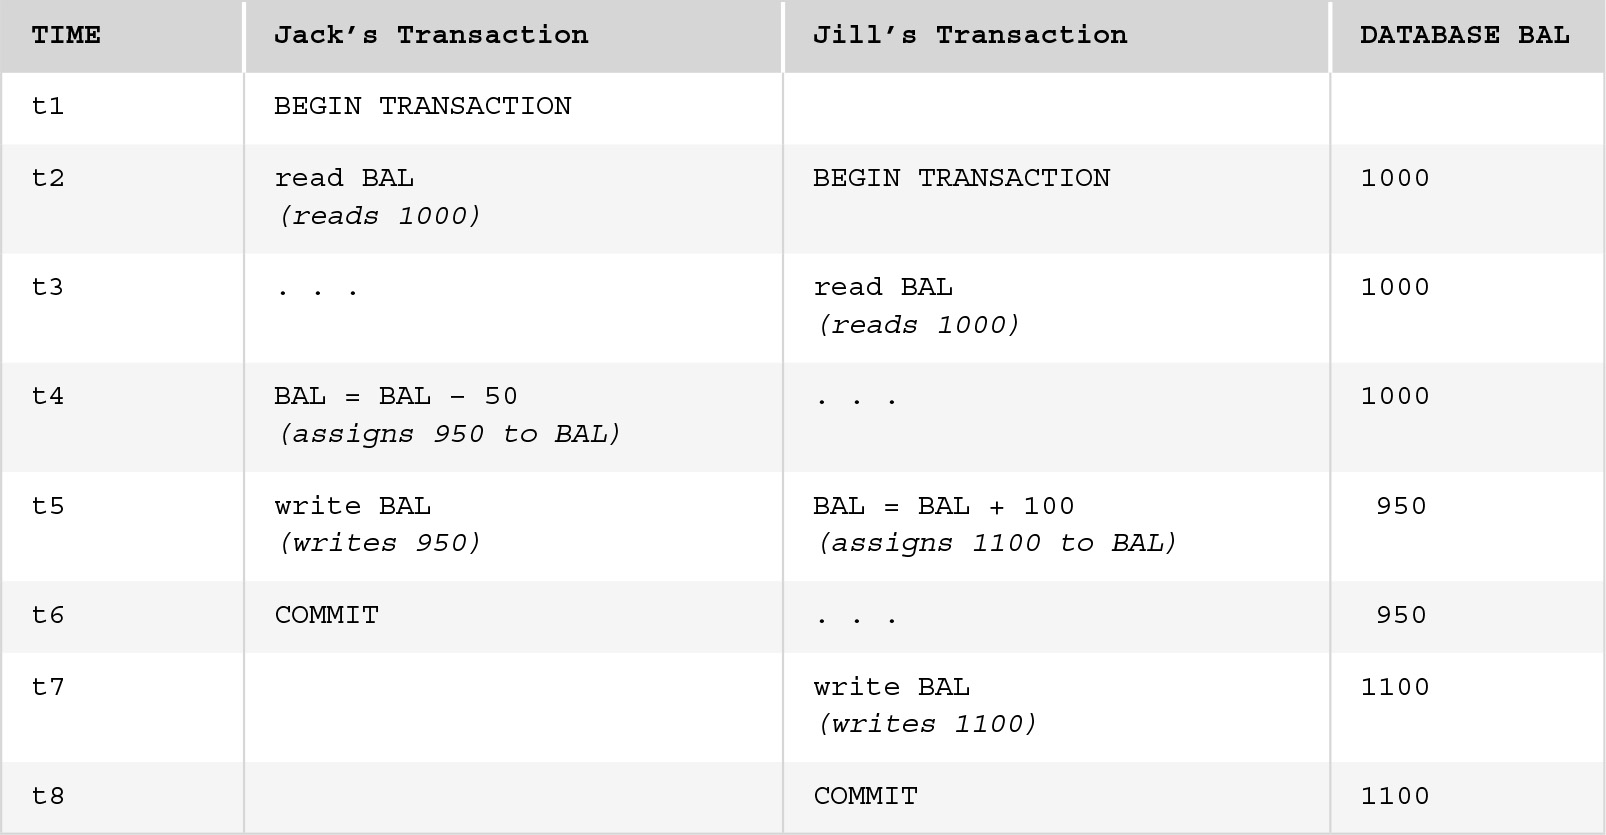 A table illustrating the Lost Update Problem. The table has 4 columns labeled Time, Jack’s Transaction, Jill’s Transaction, and database bal. The row entries are as follows.
Row 1. Time: t 1. Jack’s transaction: BEGIN TRANSACTION. Jill’s transaction: blank. database bal: blank.
Row 2. Time: t 2. Jack’s transaction: read BAL open parentheses reads 1000 close parentheses. Jill’s transaction: BEGIN TRANSACTION. database bal: 1000.
Row 3. Time: t 3. Jack’s transaction: dot, dot, dot. Jill’s transaction: read BAL open parentheses reads 1000 close parentheses. database bal: 1000.
Row 4. Time: t 4. Jack’s transaction: BAL equals BAL minus 50 open parentheses assigns 950 to BAL close parentheses. Jill’s transaction: dot, dot, dot. database bal: 1000.
Row 5. Time: t 5. Jack’s transaction: write BAL open parentheses writes 950 close parentheses. Jill’s transaction: BAL equals BAL plus 100 open parentheses assigns 1100 to BAL close parentheses. database bal: 950.
Row 6. Time: t 6. Jack’s transaction: COMMIT. Jill’s transaction: dot, dot, dot. database bal: 950.
Row 7. Time: t 7. Jack’s transaction: blank. Jill’s transaction: write BAL open parentheses writes 1100 close parentheses. database bal: 1100.
Row 8. Time: t 8. Jack’s transaction: blank. Jill’s transaction: COMMIT. database bal: 1100.
